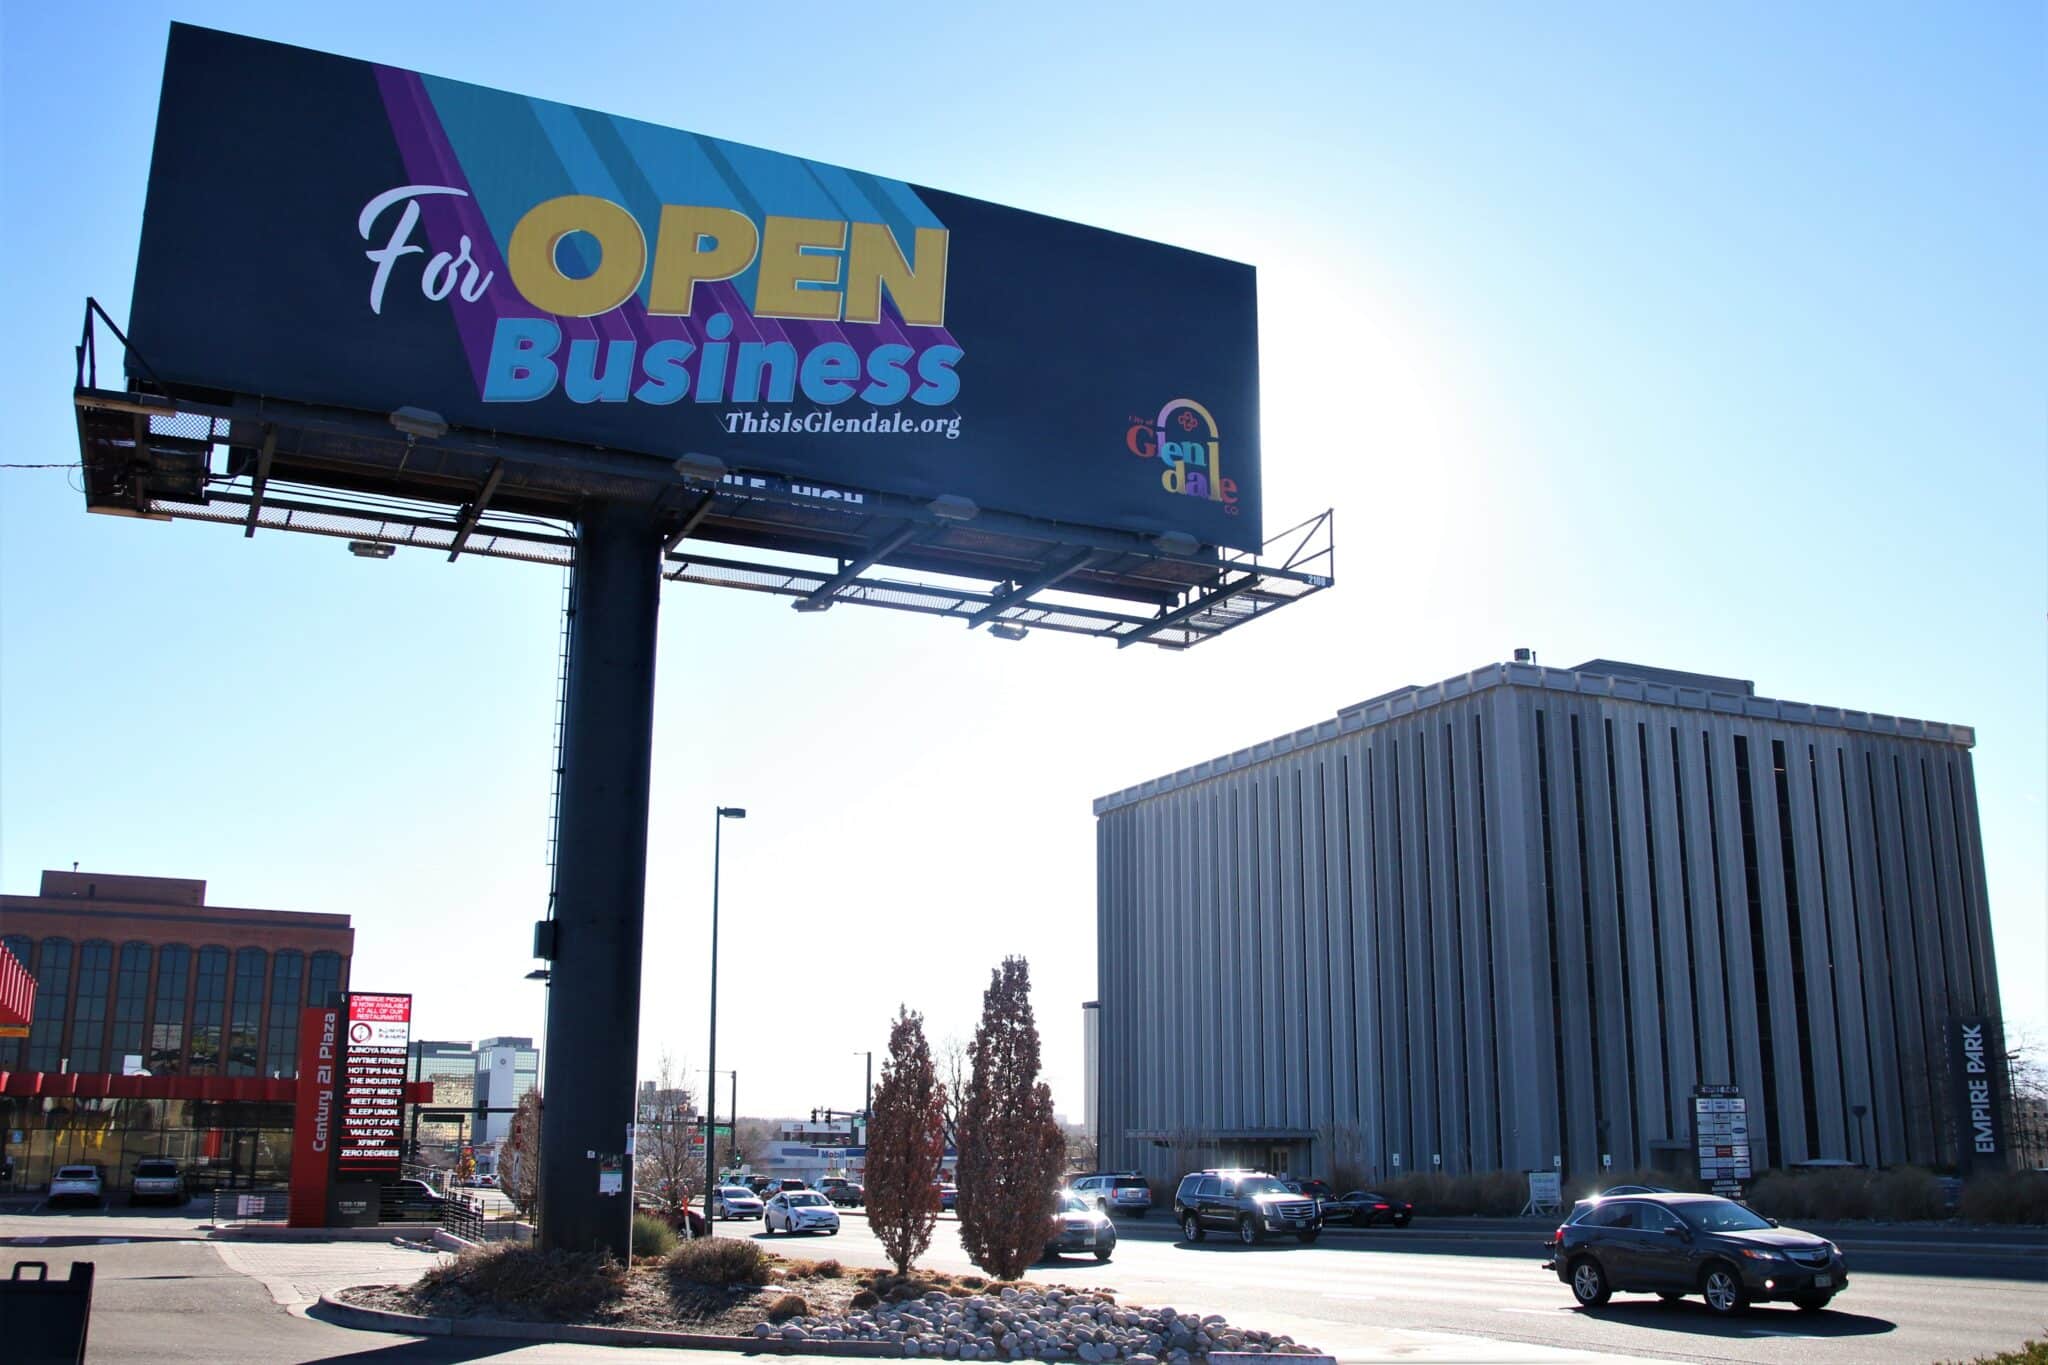 Glendale launches ad campaign to promote itself